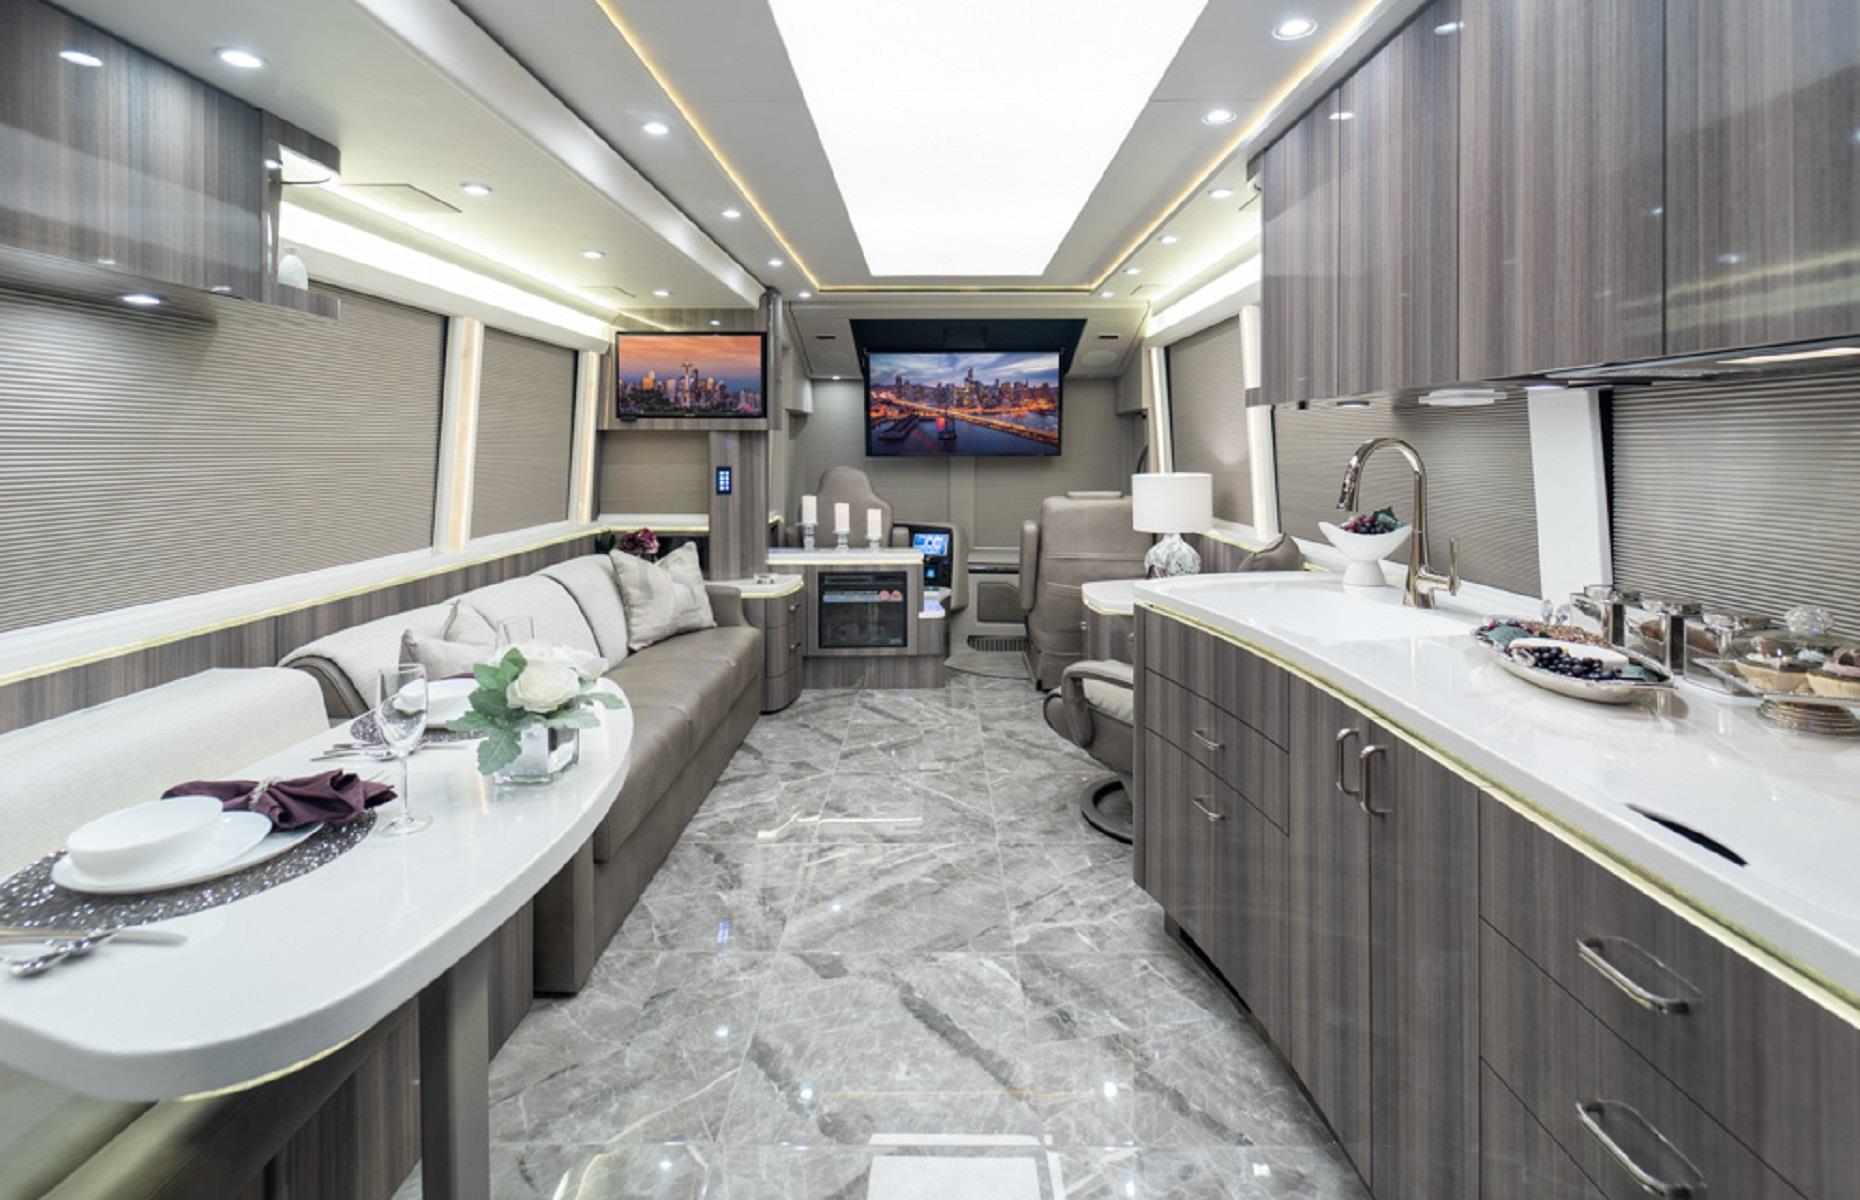 <p>Decked out with stylish fixtures, vibrant <a href="https://www.loveproperty.com/gallerylist/91728/55-genius-hacks-for-led-strip-lights">LED lights</a> and plenty of smart home technology, including underfloor heating, this plush model is a motorhome worthy of the rich and famous. Inside, the opulent interior has plush leather furnishings, sparkling floors and stylish wood-effect cabinetry.</p>